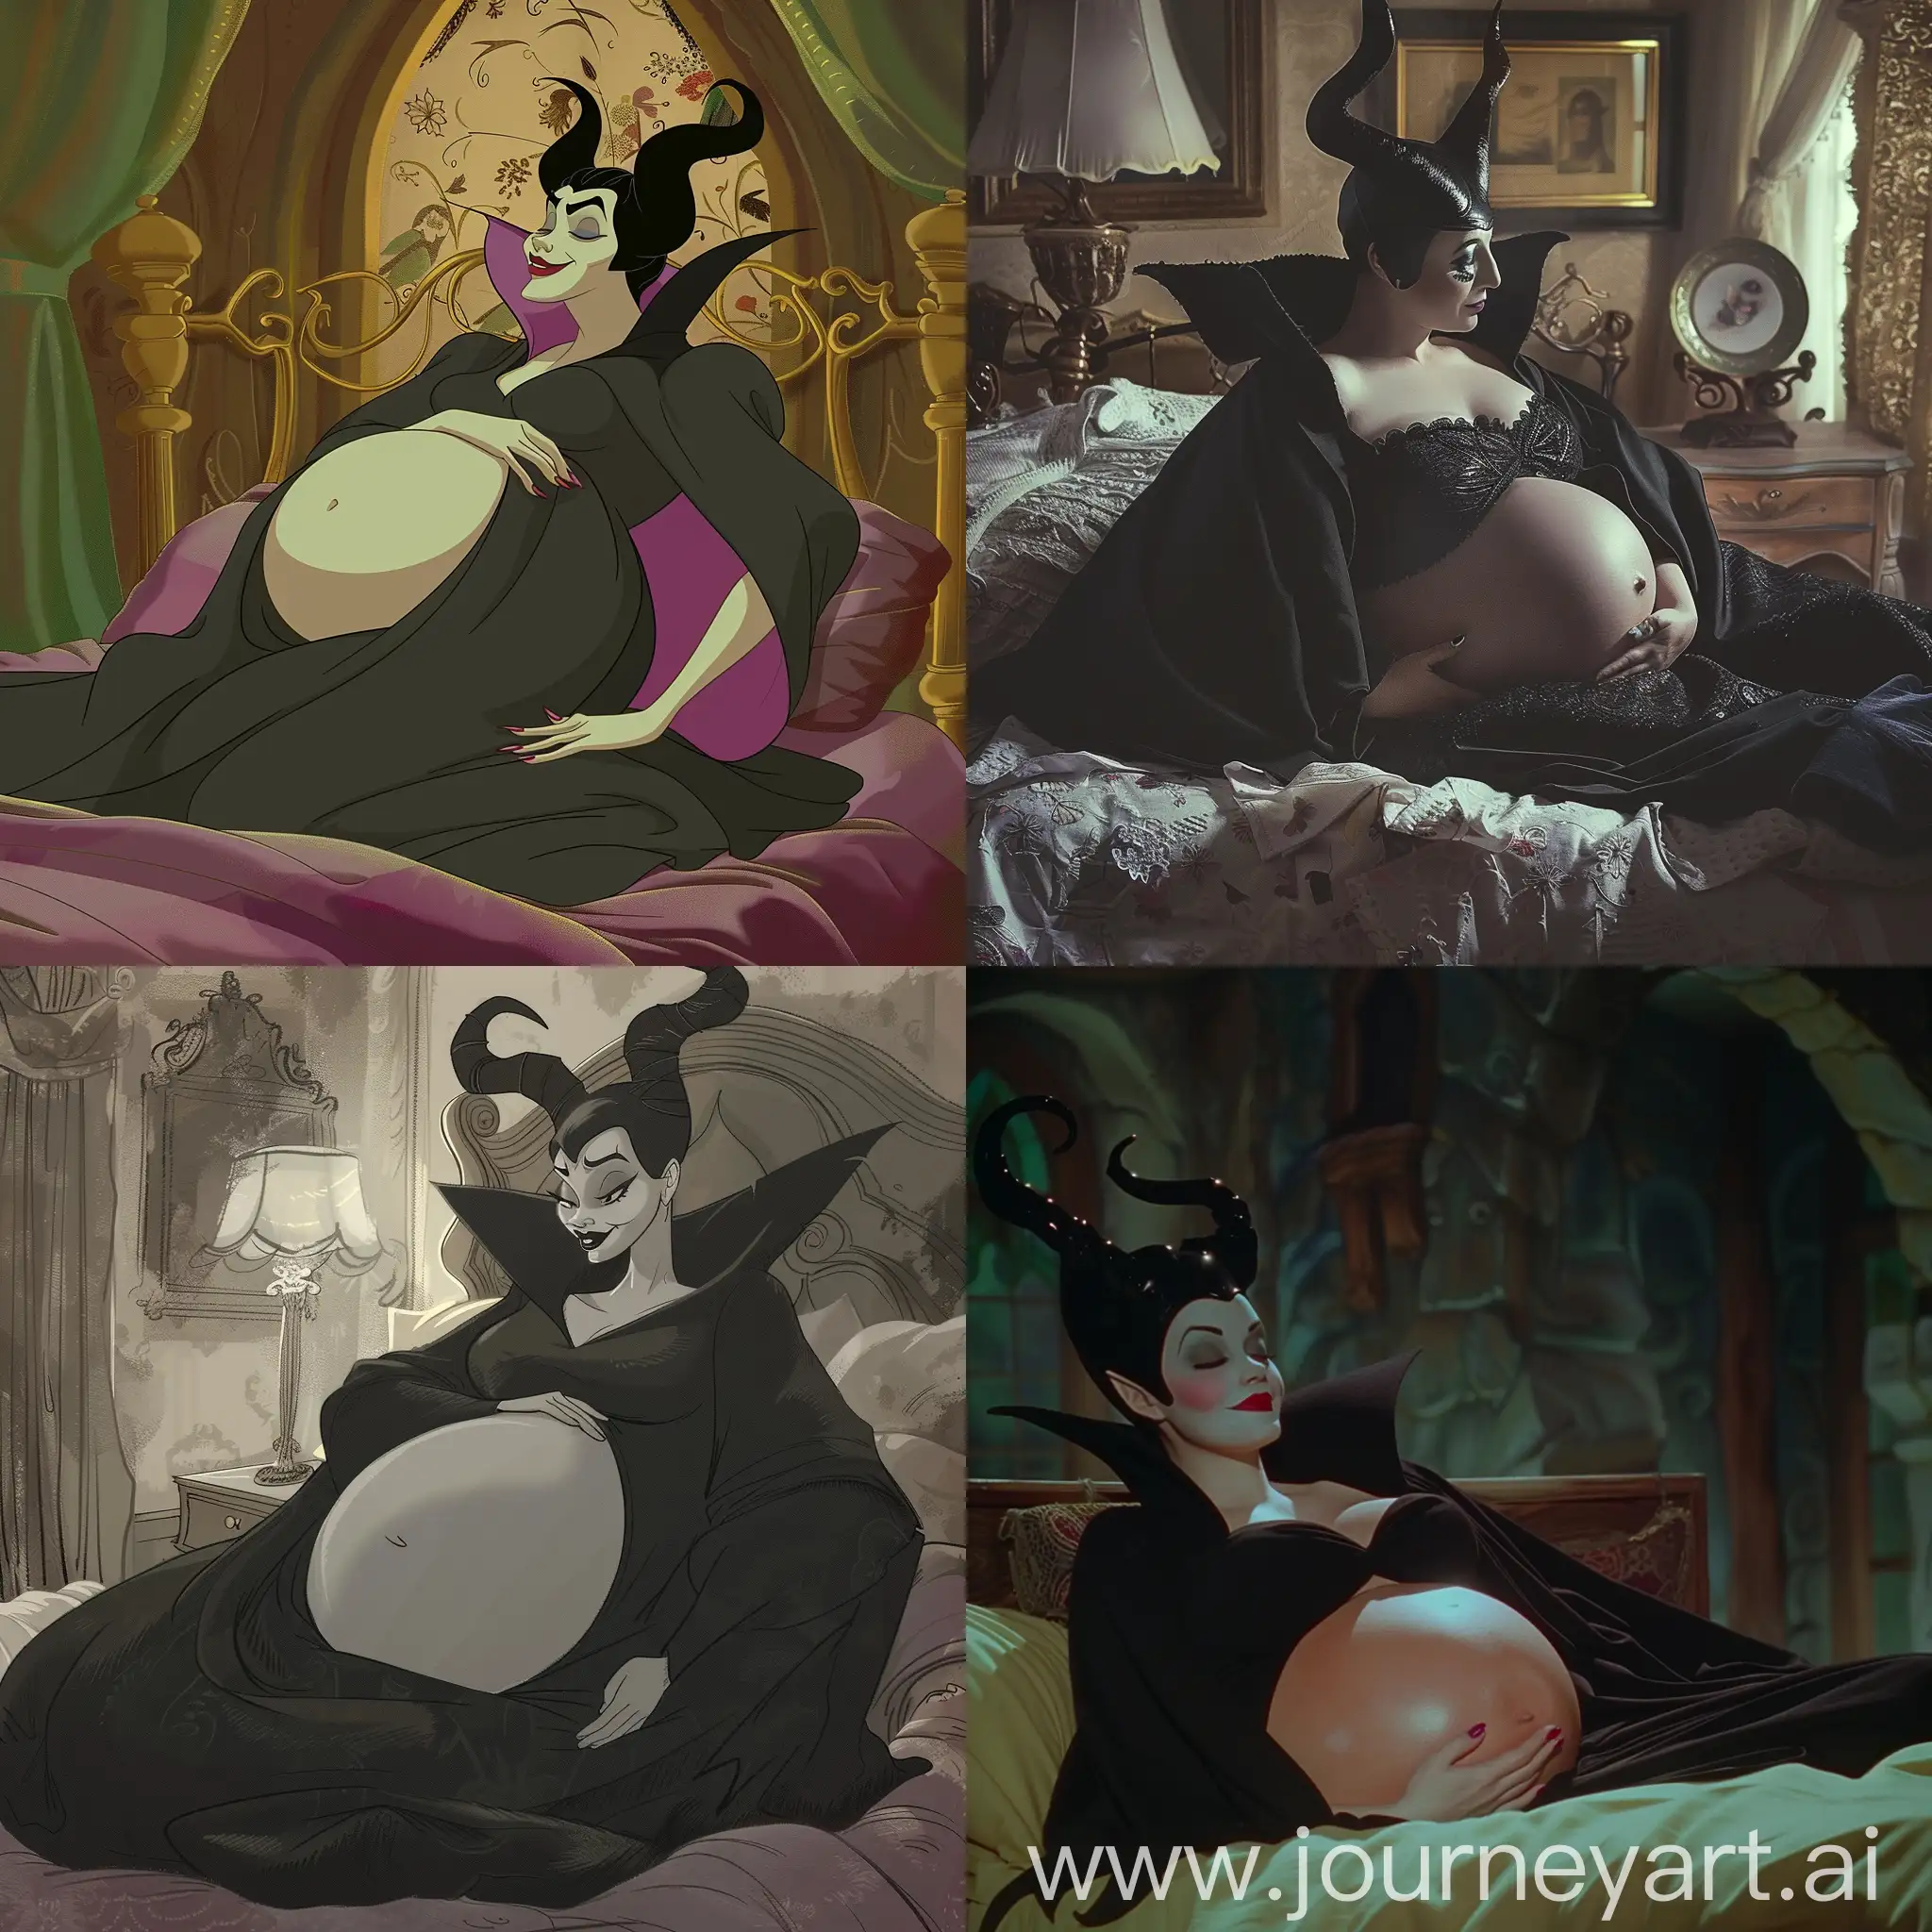 Maleficent, Very Pregnant, Her pregnant belly is very large, Laying in her bed, Bare belly.